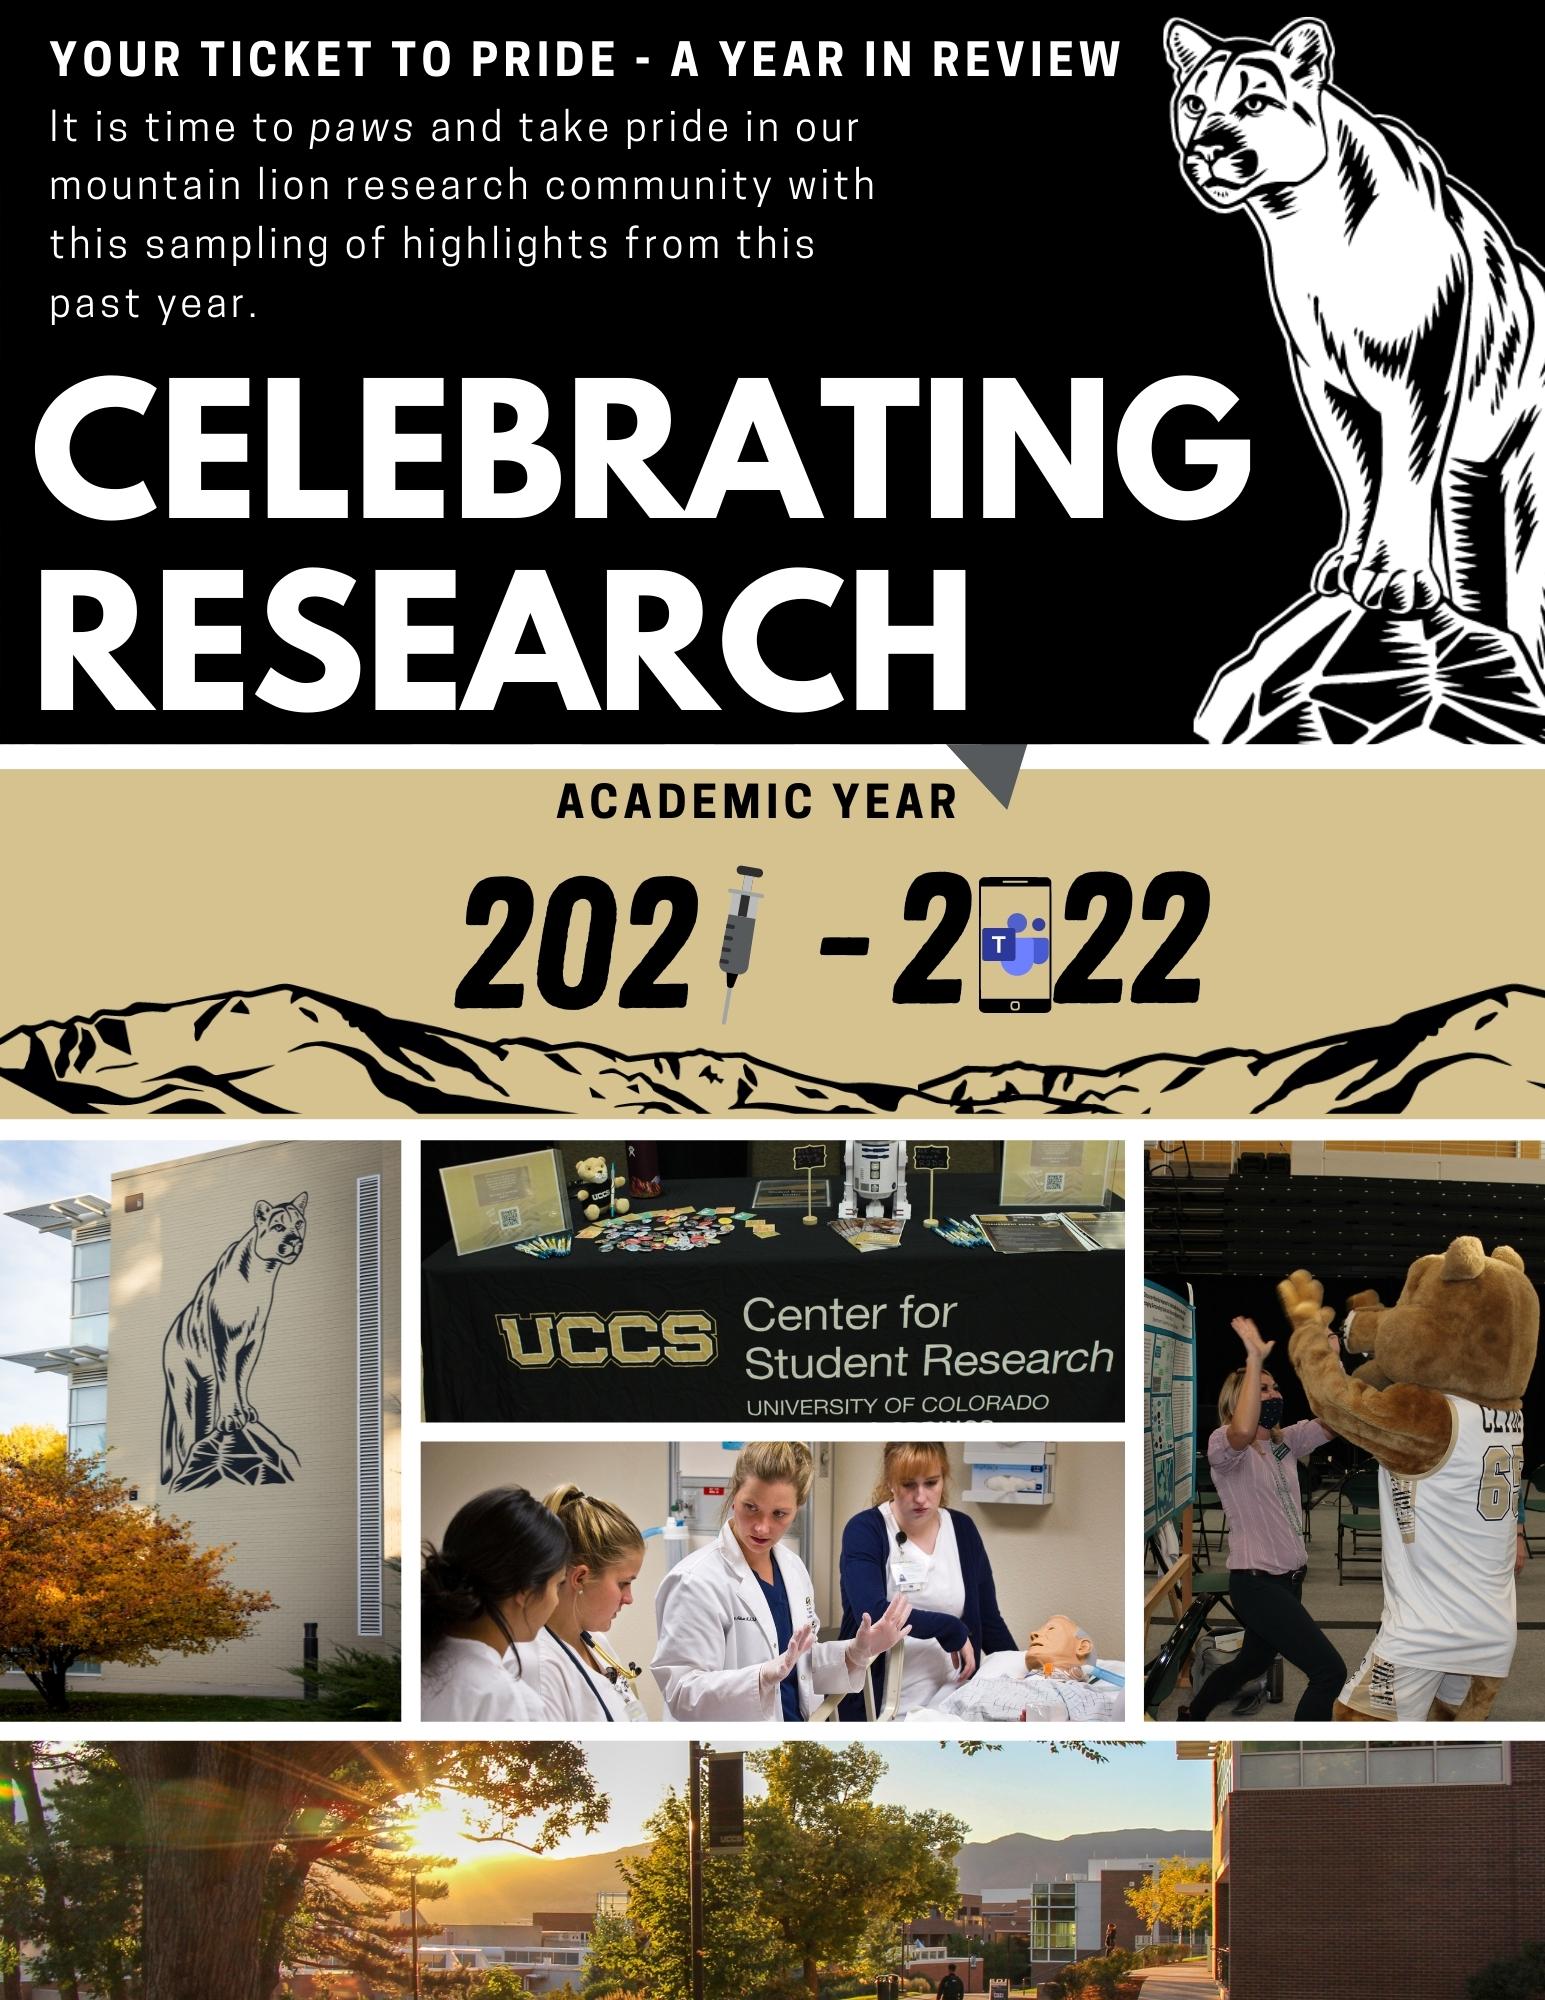 Celebrating Research Academic Year 2021 - 2022